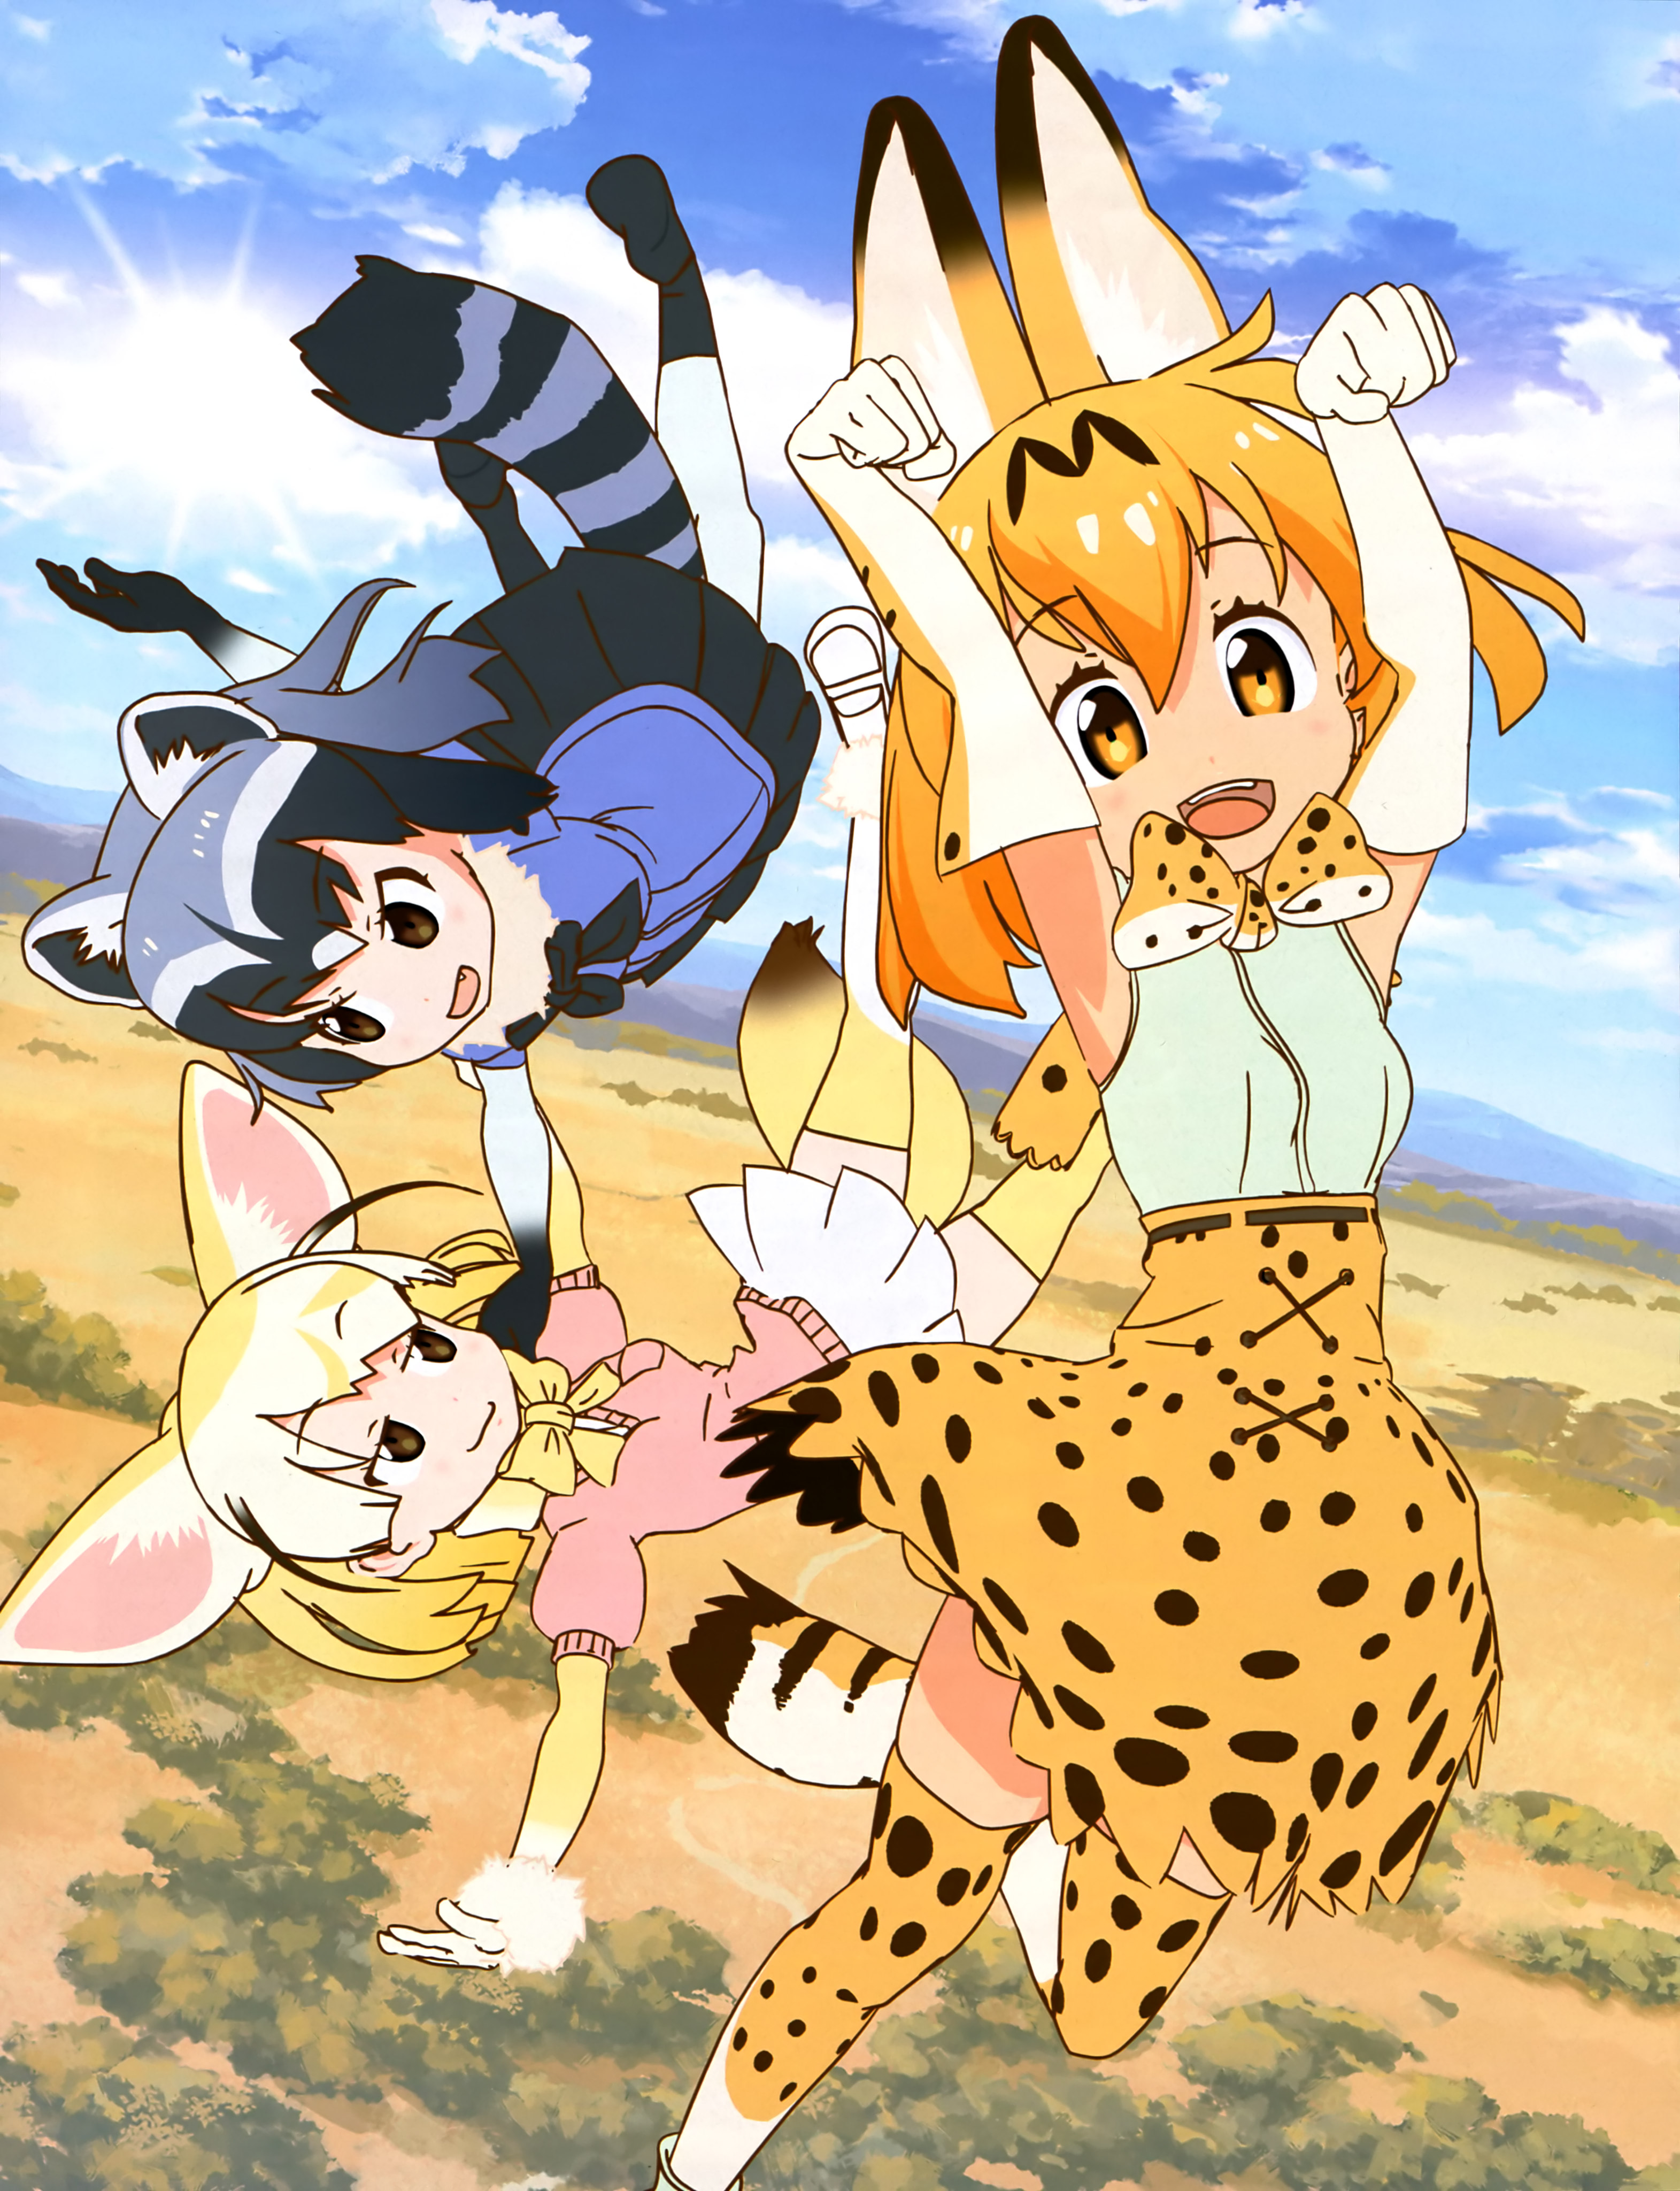 Kemono Friends Wallpapers Anime Hq Kemono Friends Pictures 4k Wallpapers 19